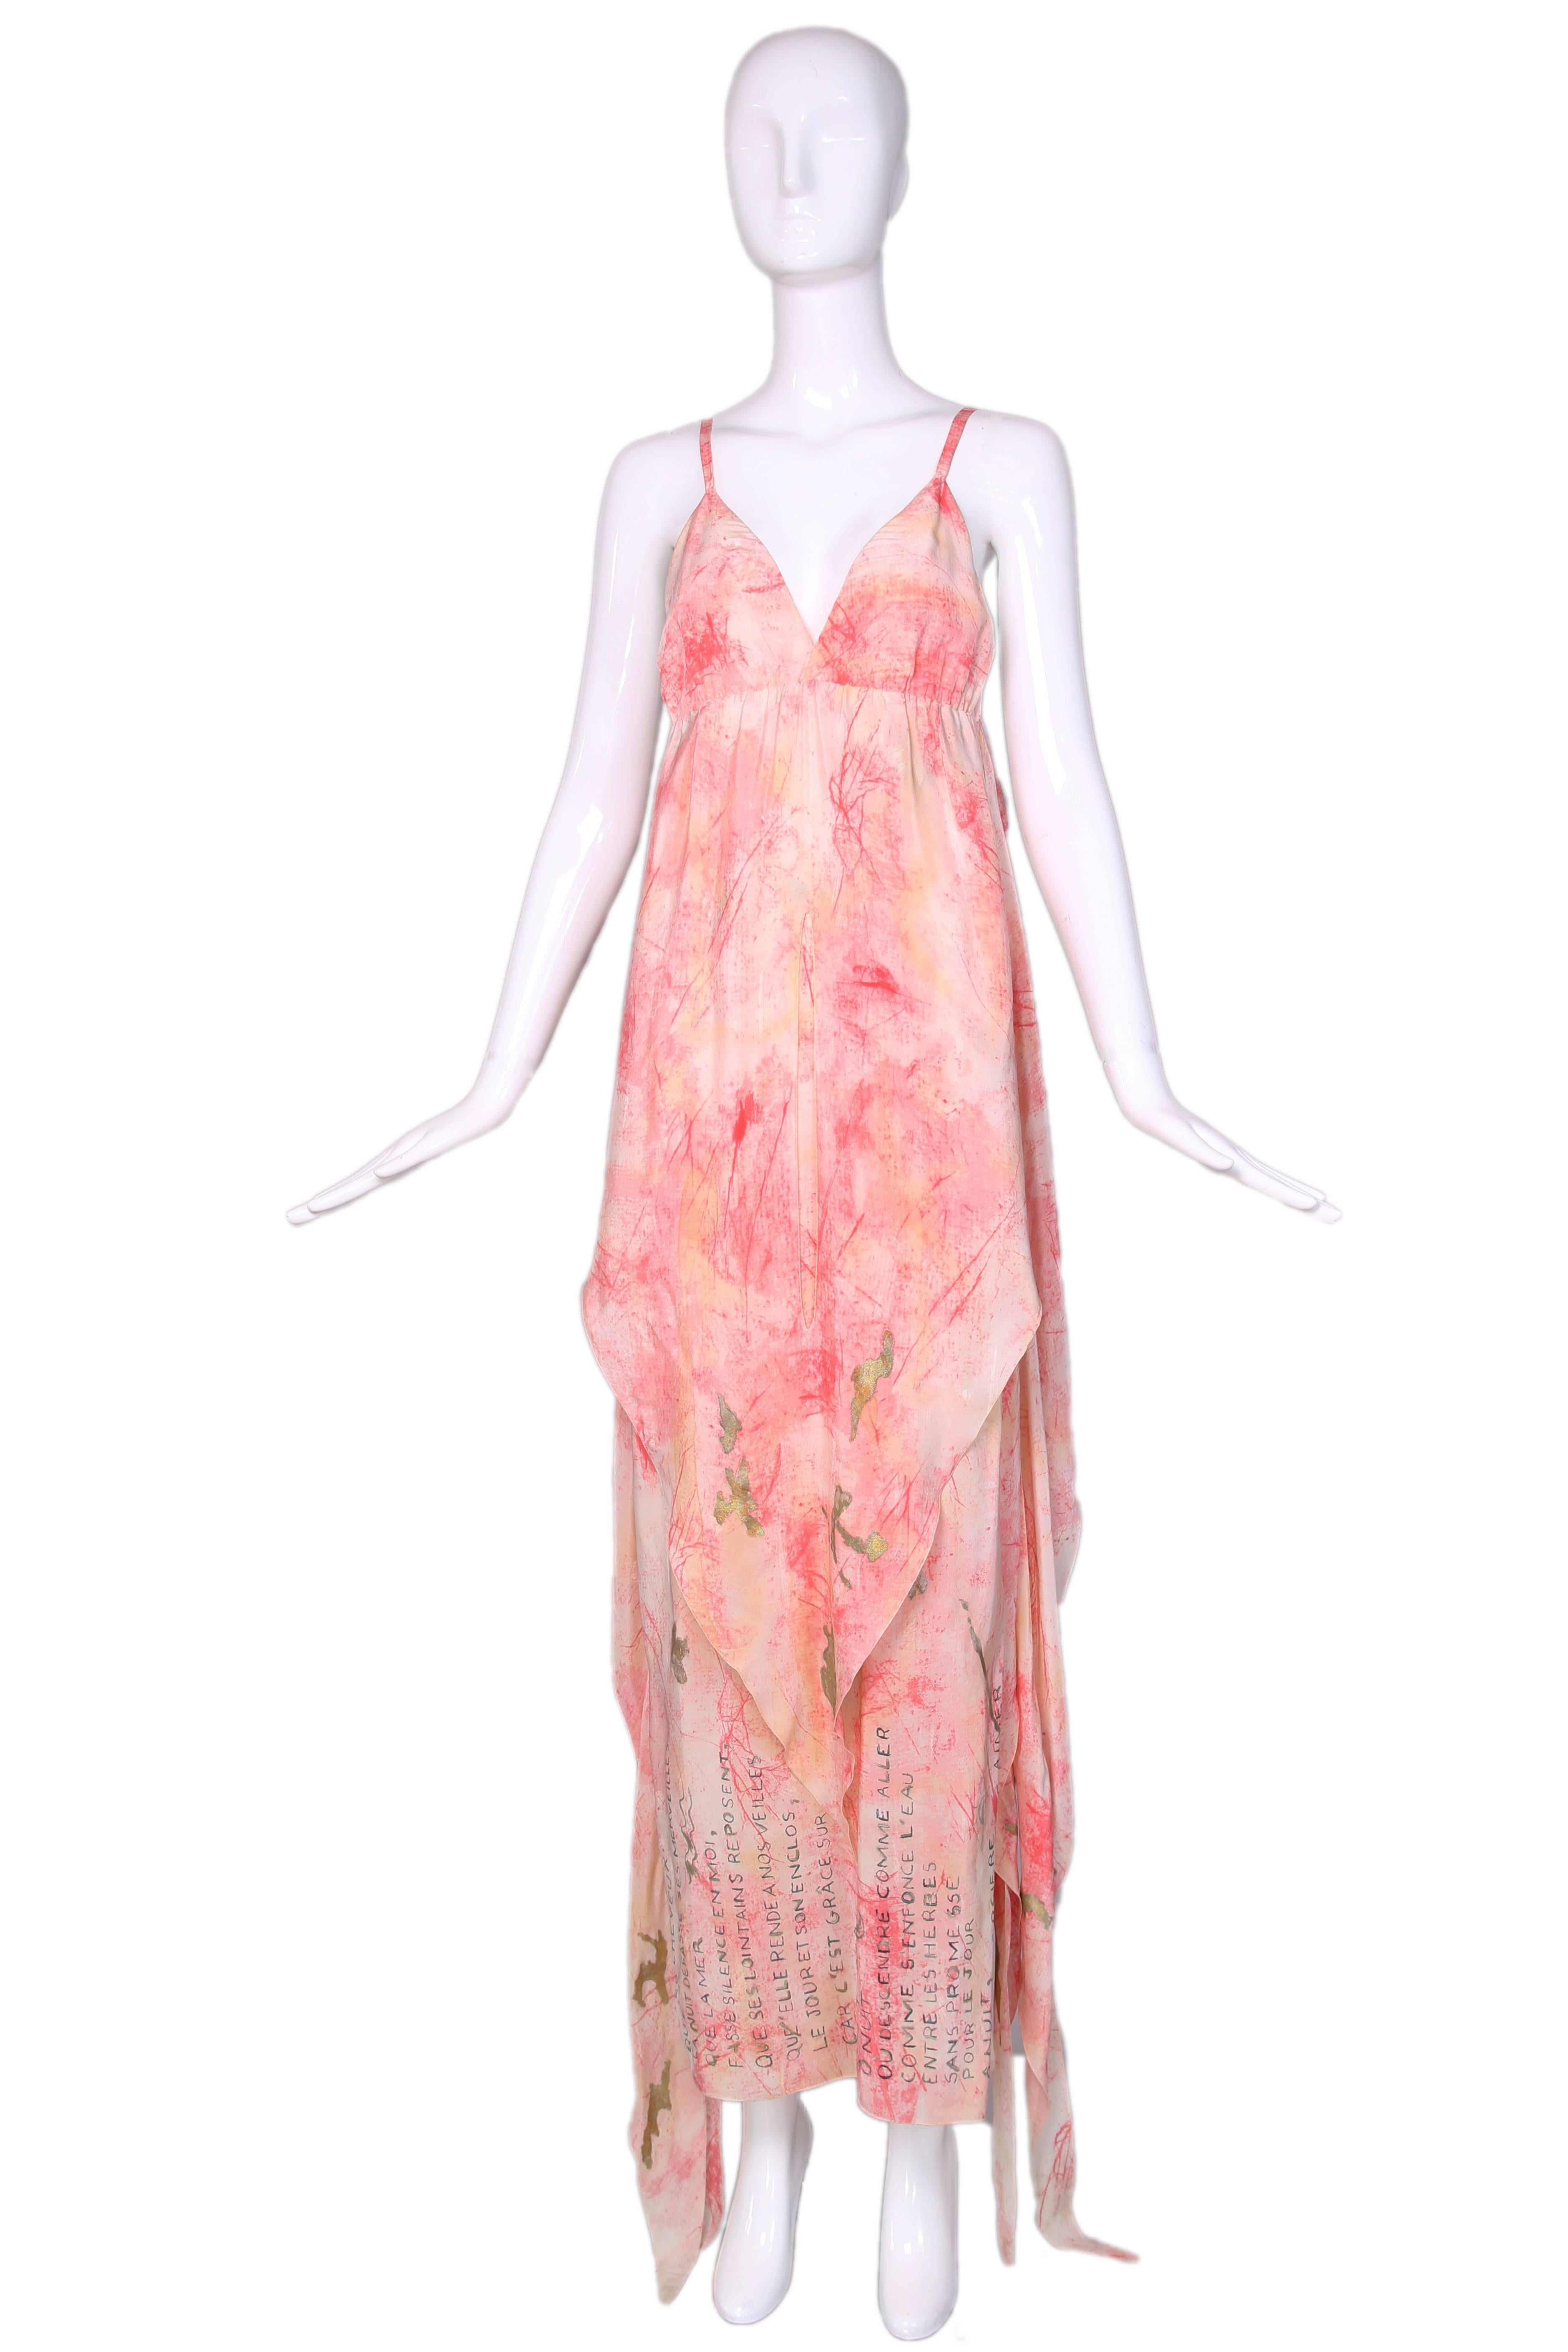 Vintage Chloe orange-pink silk spagetti strap maxi dress w/layers that can be worn multiple ways. Hand-painted gold writing at bottom in French. In excellent condition. Size EU 38.
MEASUREMENTS:
Bust - 32